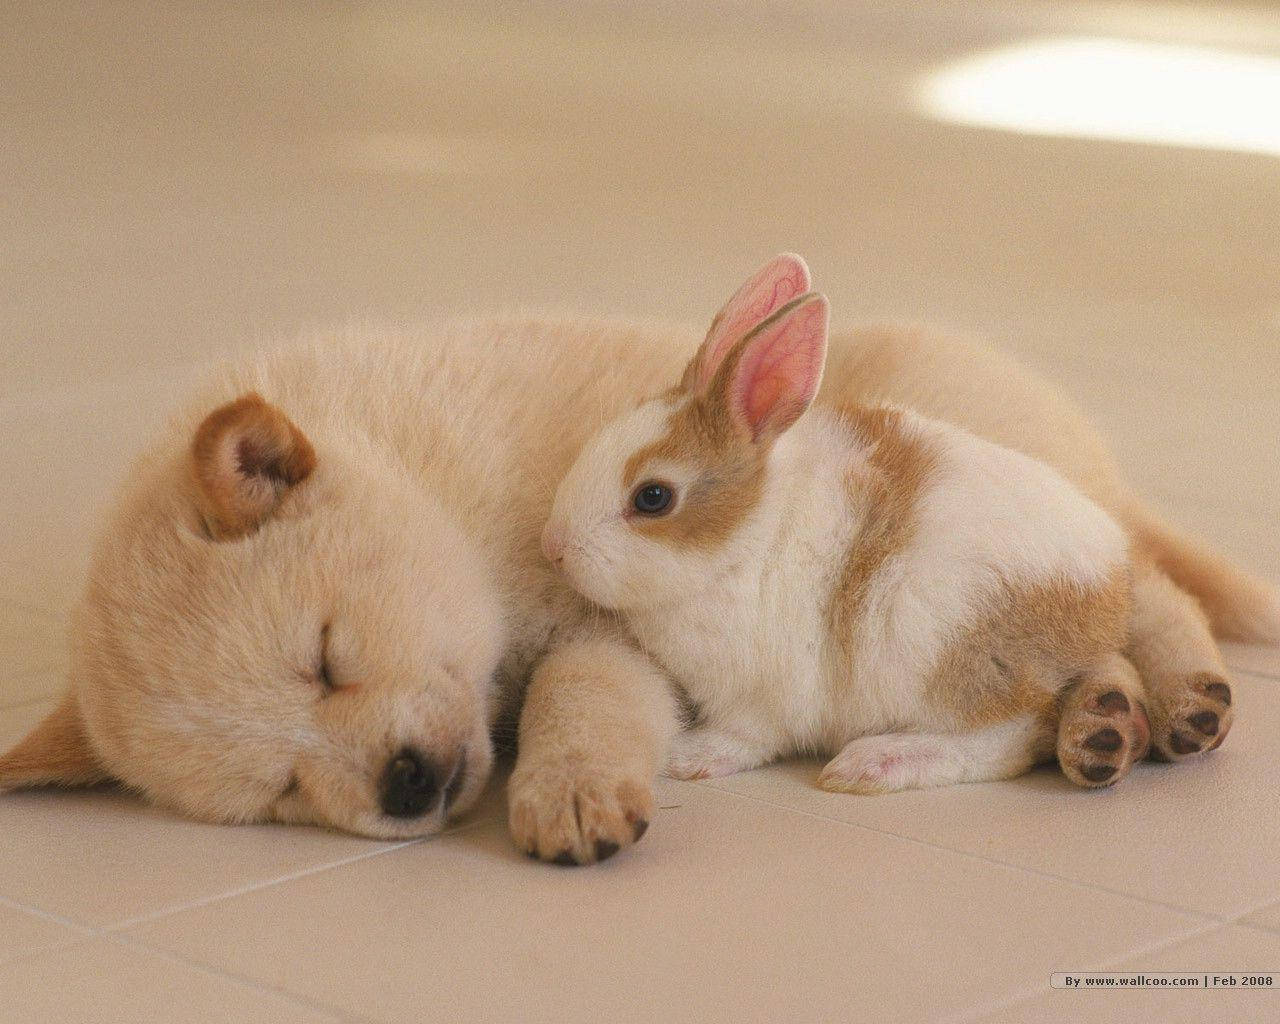 Sleeping Cute Puppy With Bunny